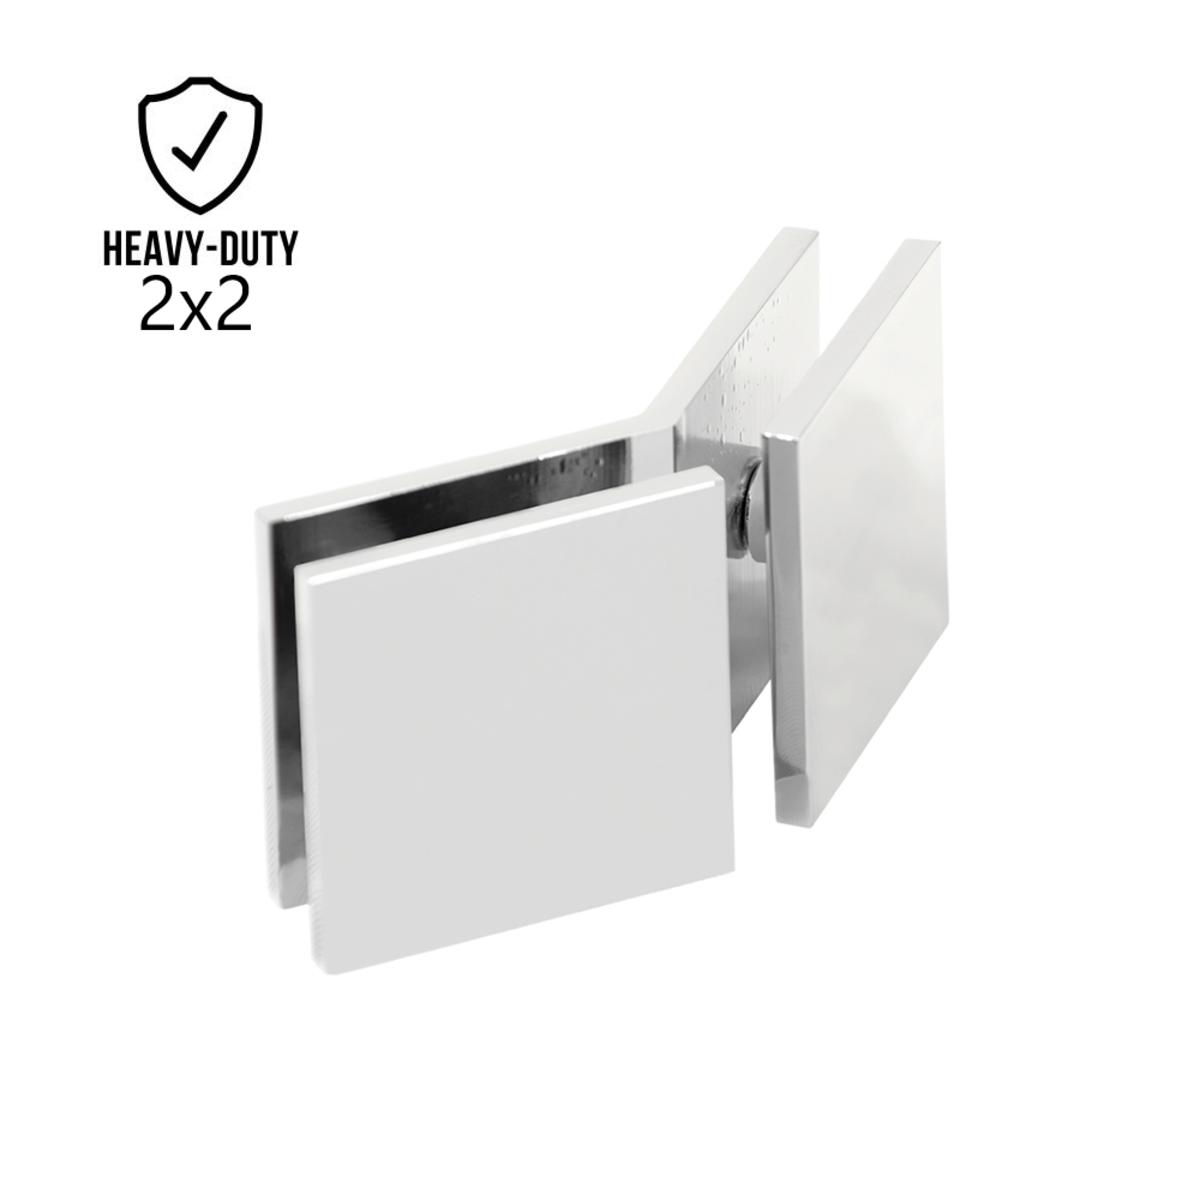 2" x 2" 135° Heavy Duty Glass to Glass Square Edges Glass Clamp